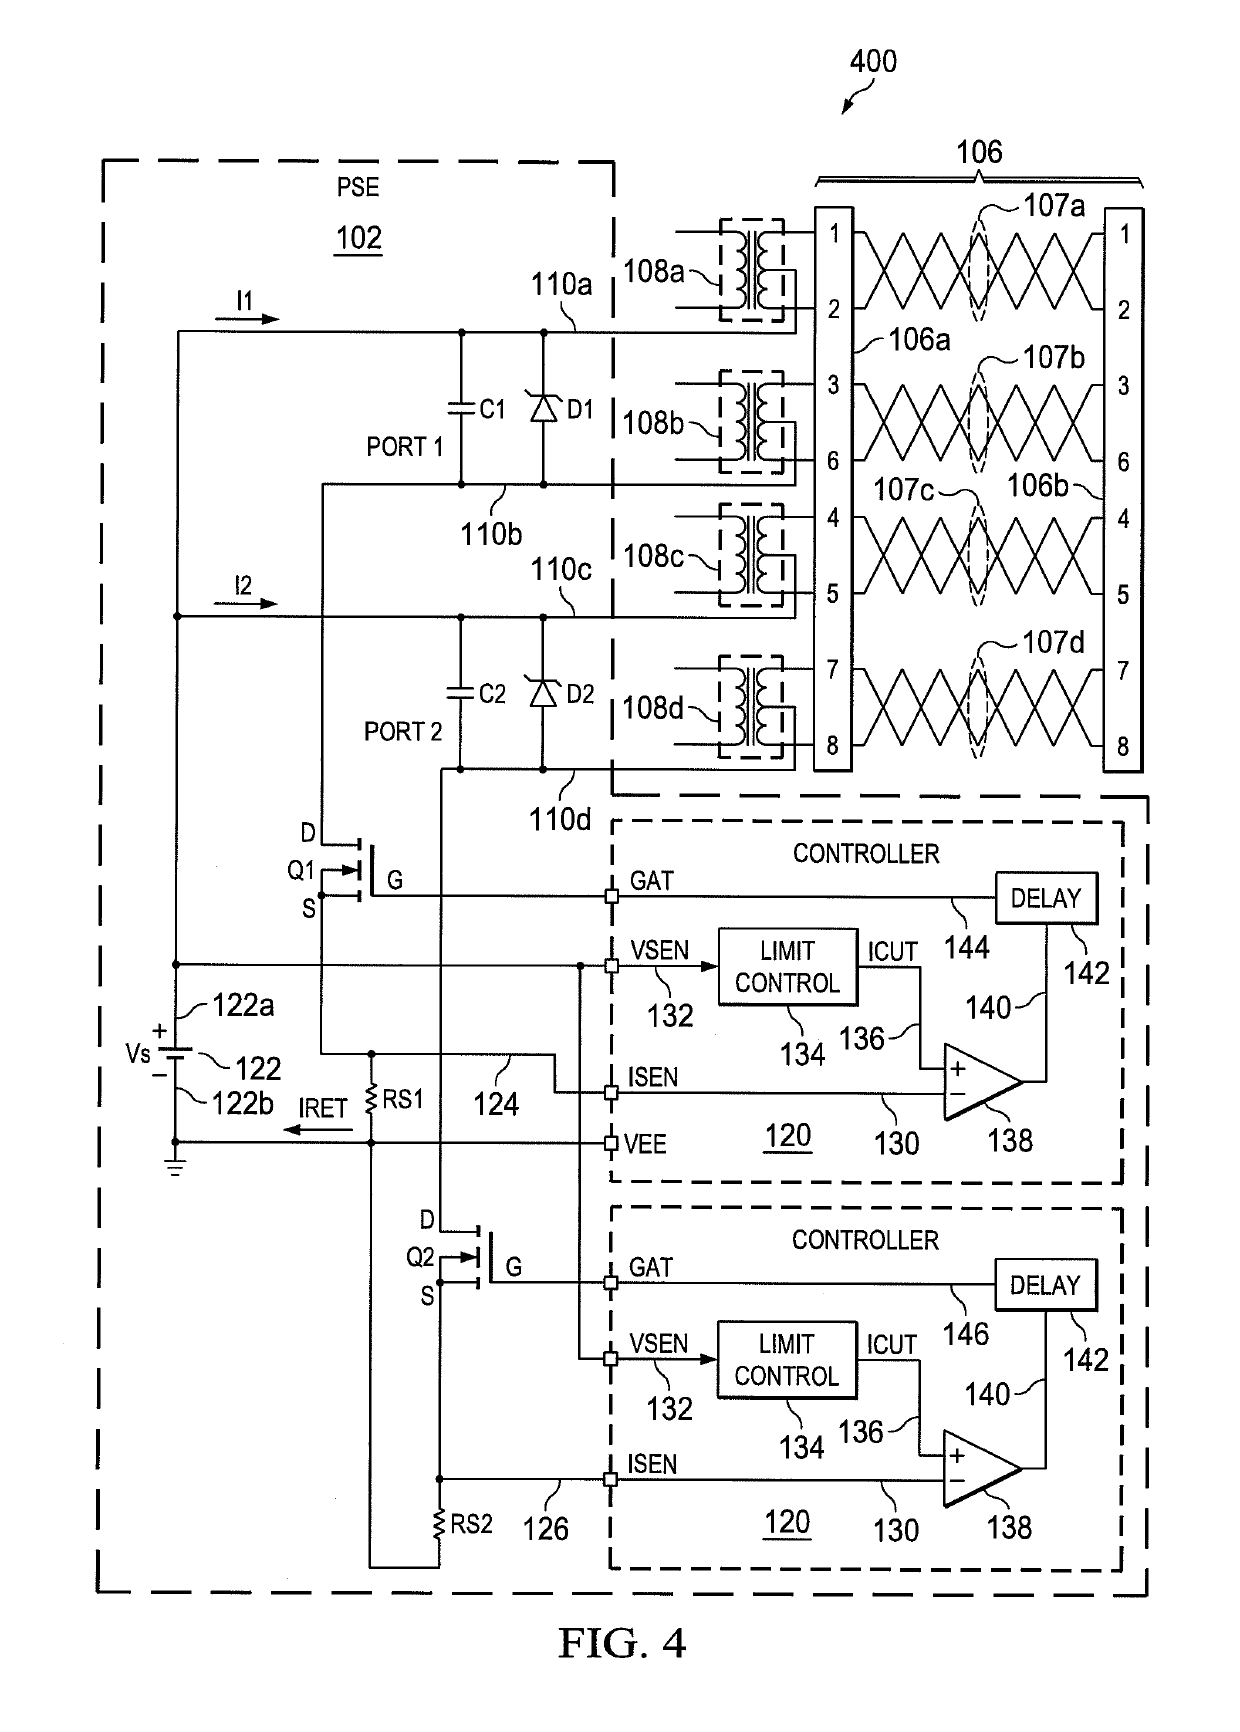 System and method for controlling power delivered to a powered device through a communication cable